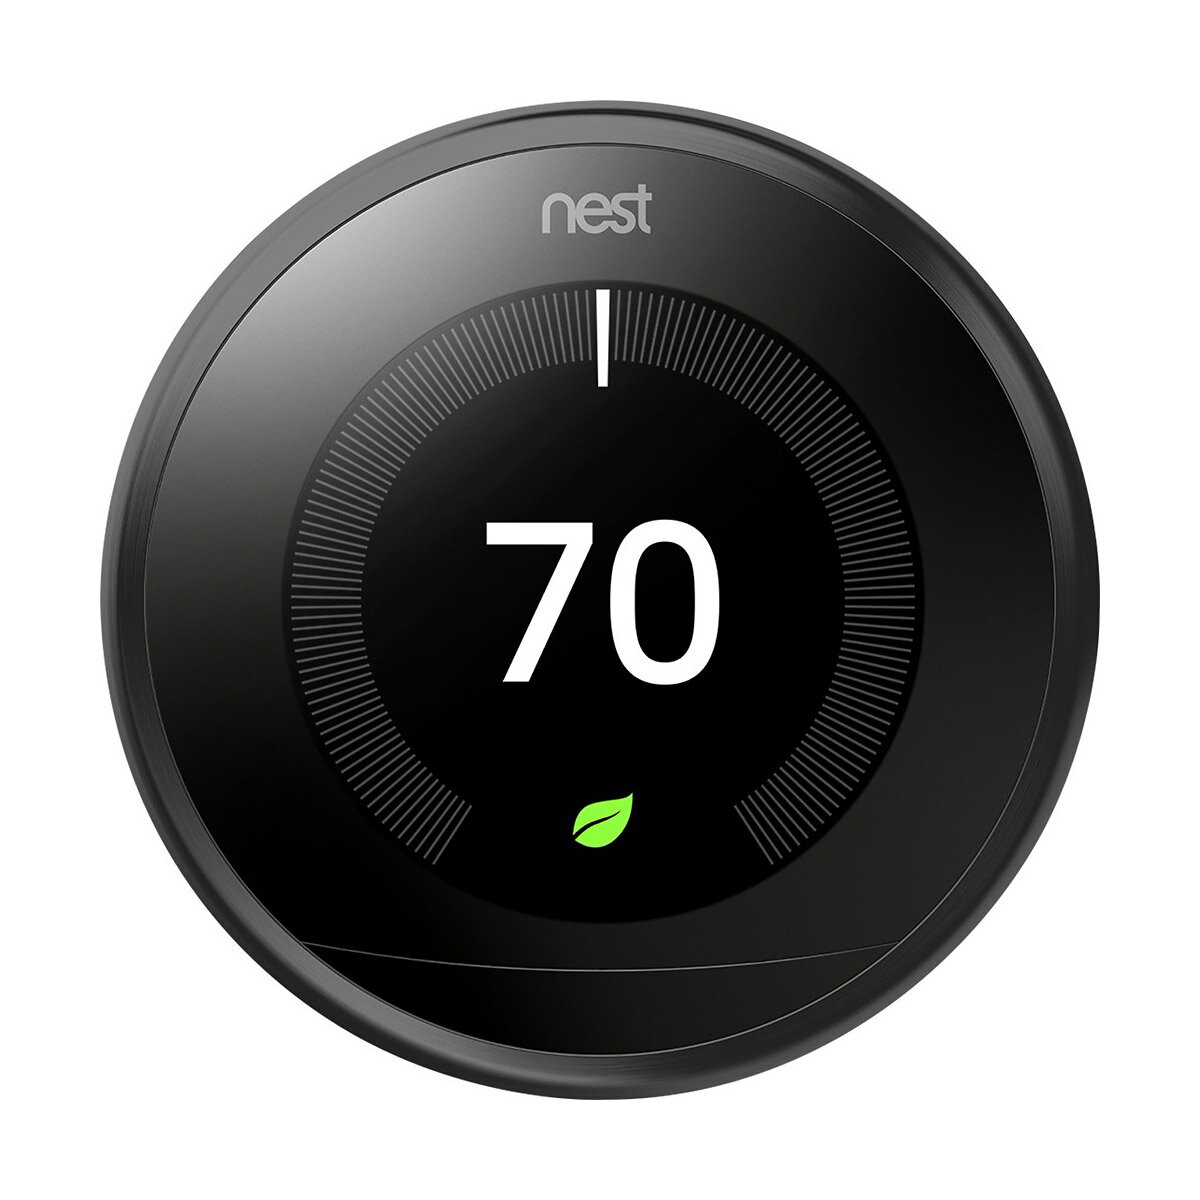 Nest 3rd Generation Programmable Wi-Fi Smart Learning Thermostat T3016US - Black 0